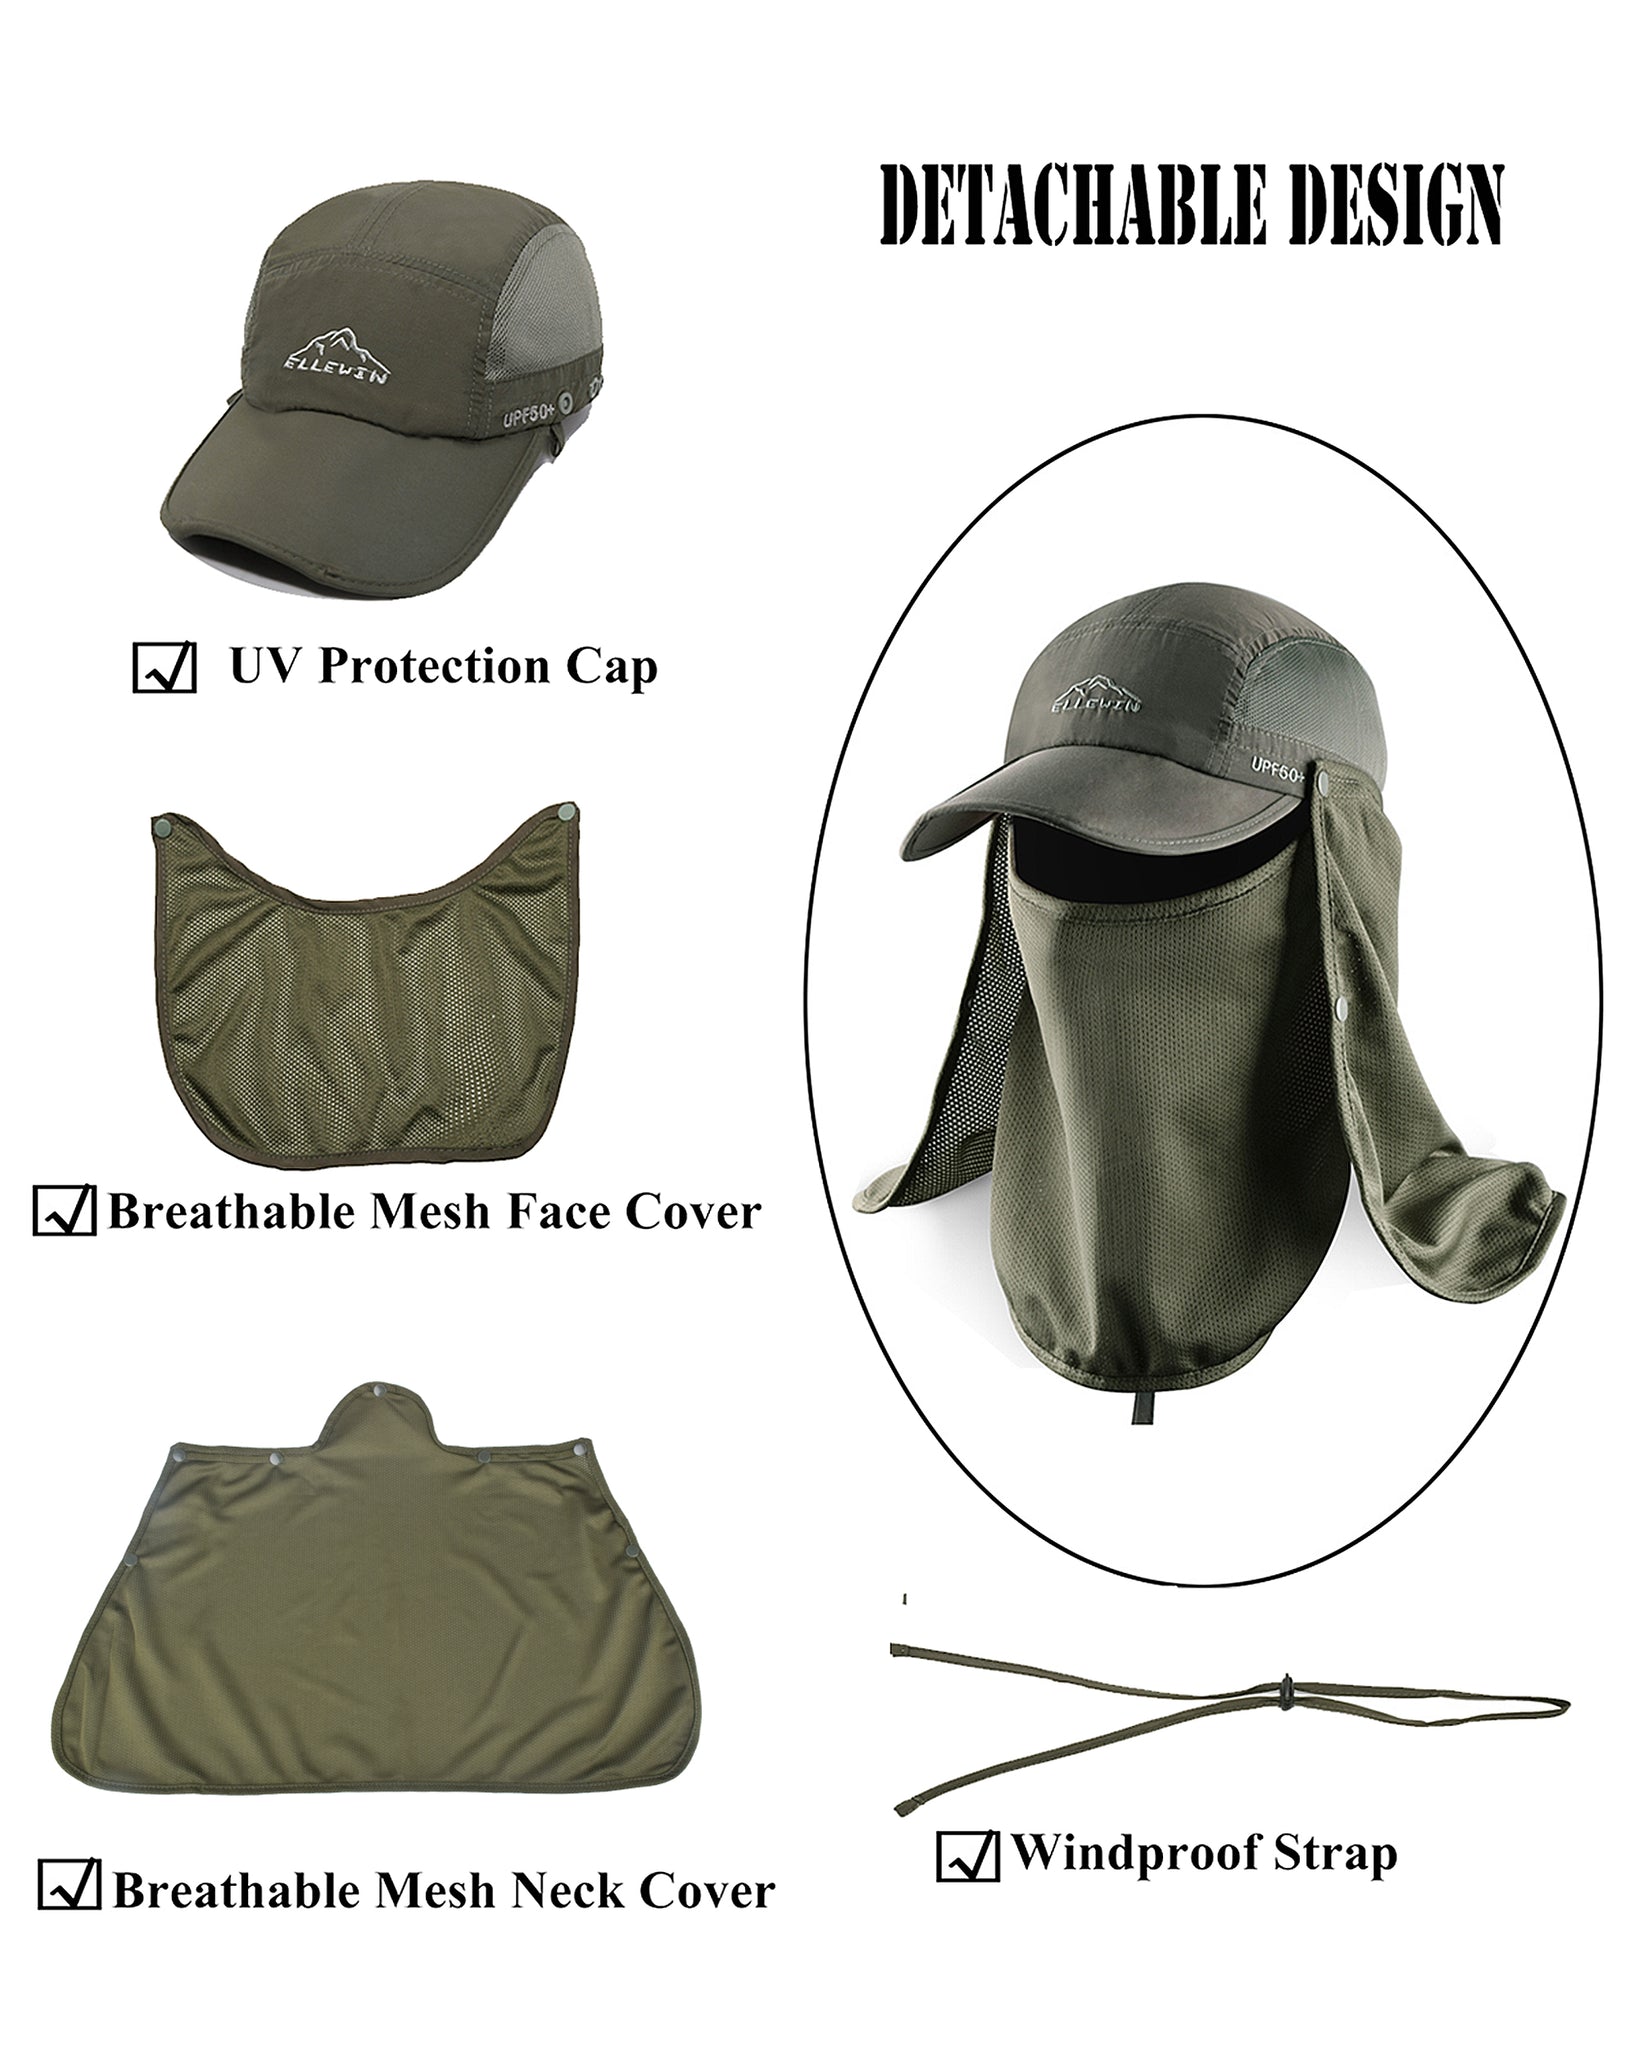 EleaEleanor 360sun Protection Hat Fishing Shade Cap for Men, Removable Face Flap Neck Cover for Outdoor Gardening Camping, Men's, Size: One Size